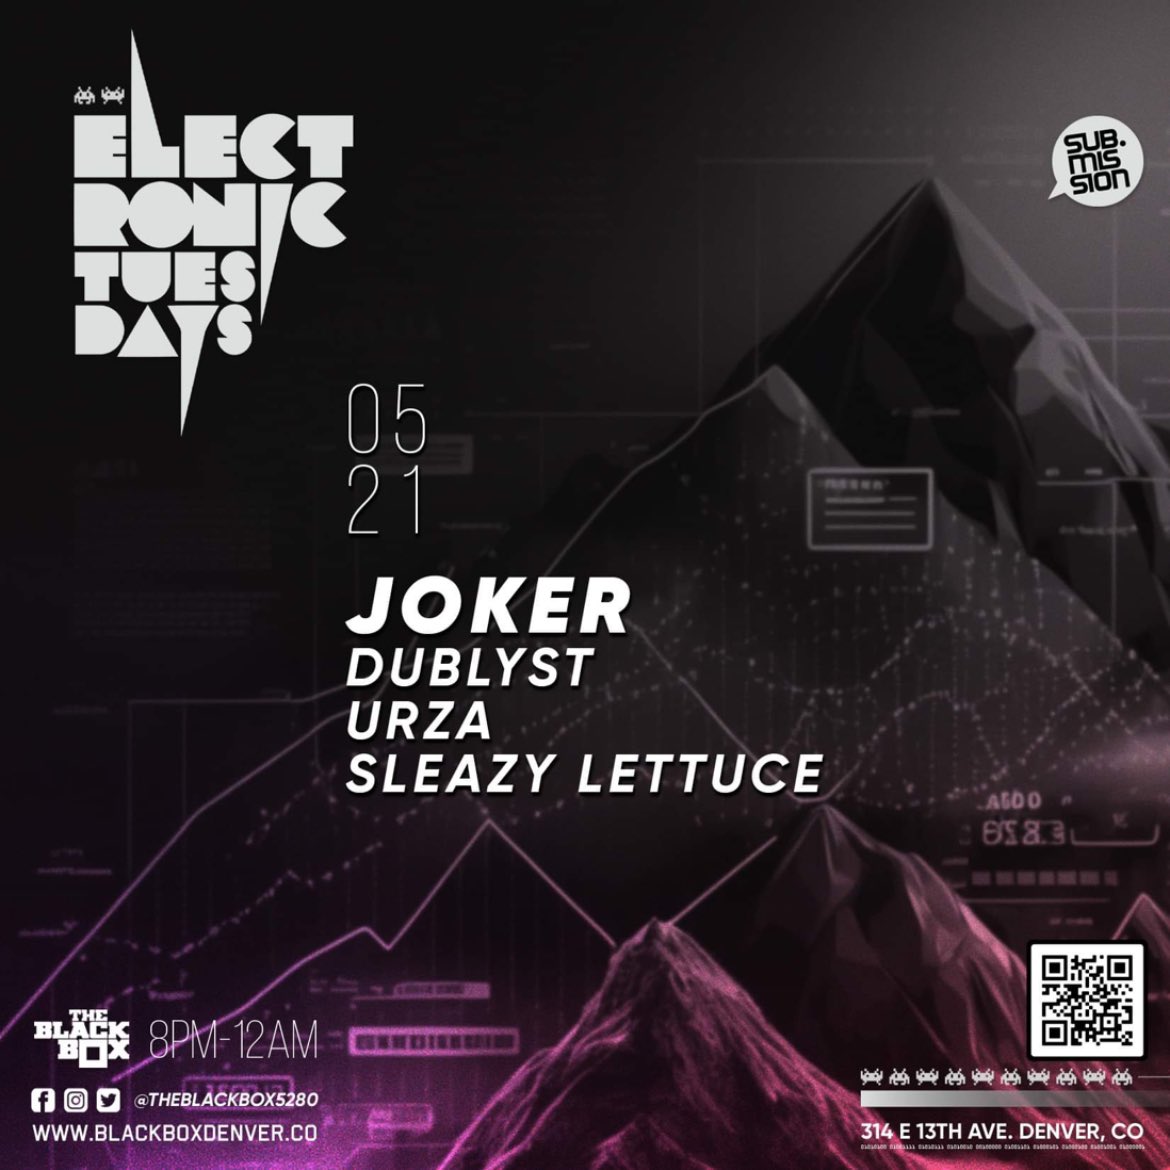 Apologies on the delay, doors are now open! Tickets available at the door! @subdotmission Electronic Tuesdays: @Joker Weekly DJ Battle: @Dublyst, Urza, @sleazylettuce